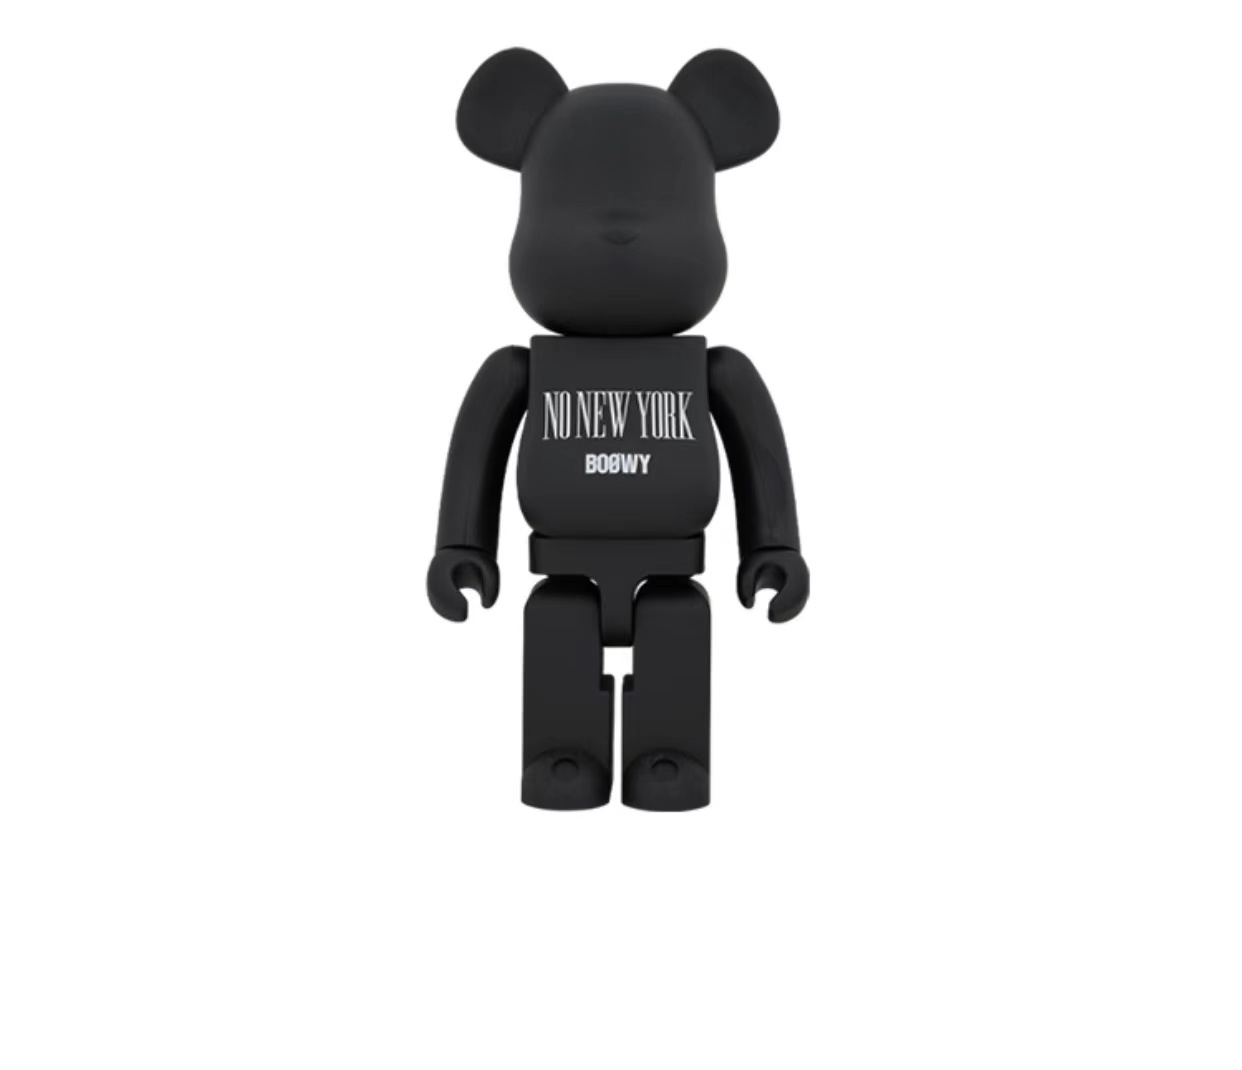 BEARBRICK/Boowy/No/New/York/積木熊－【Deal Price Picture】